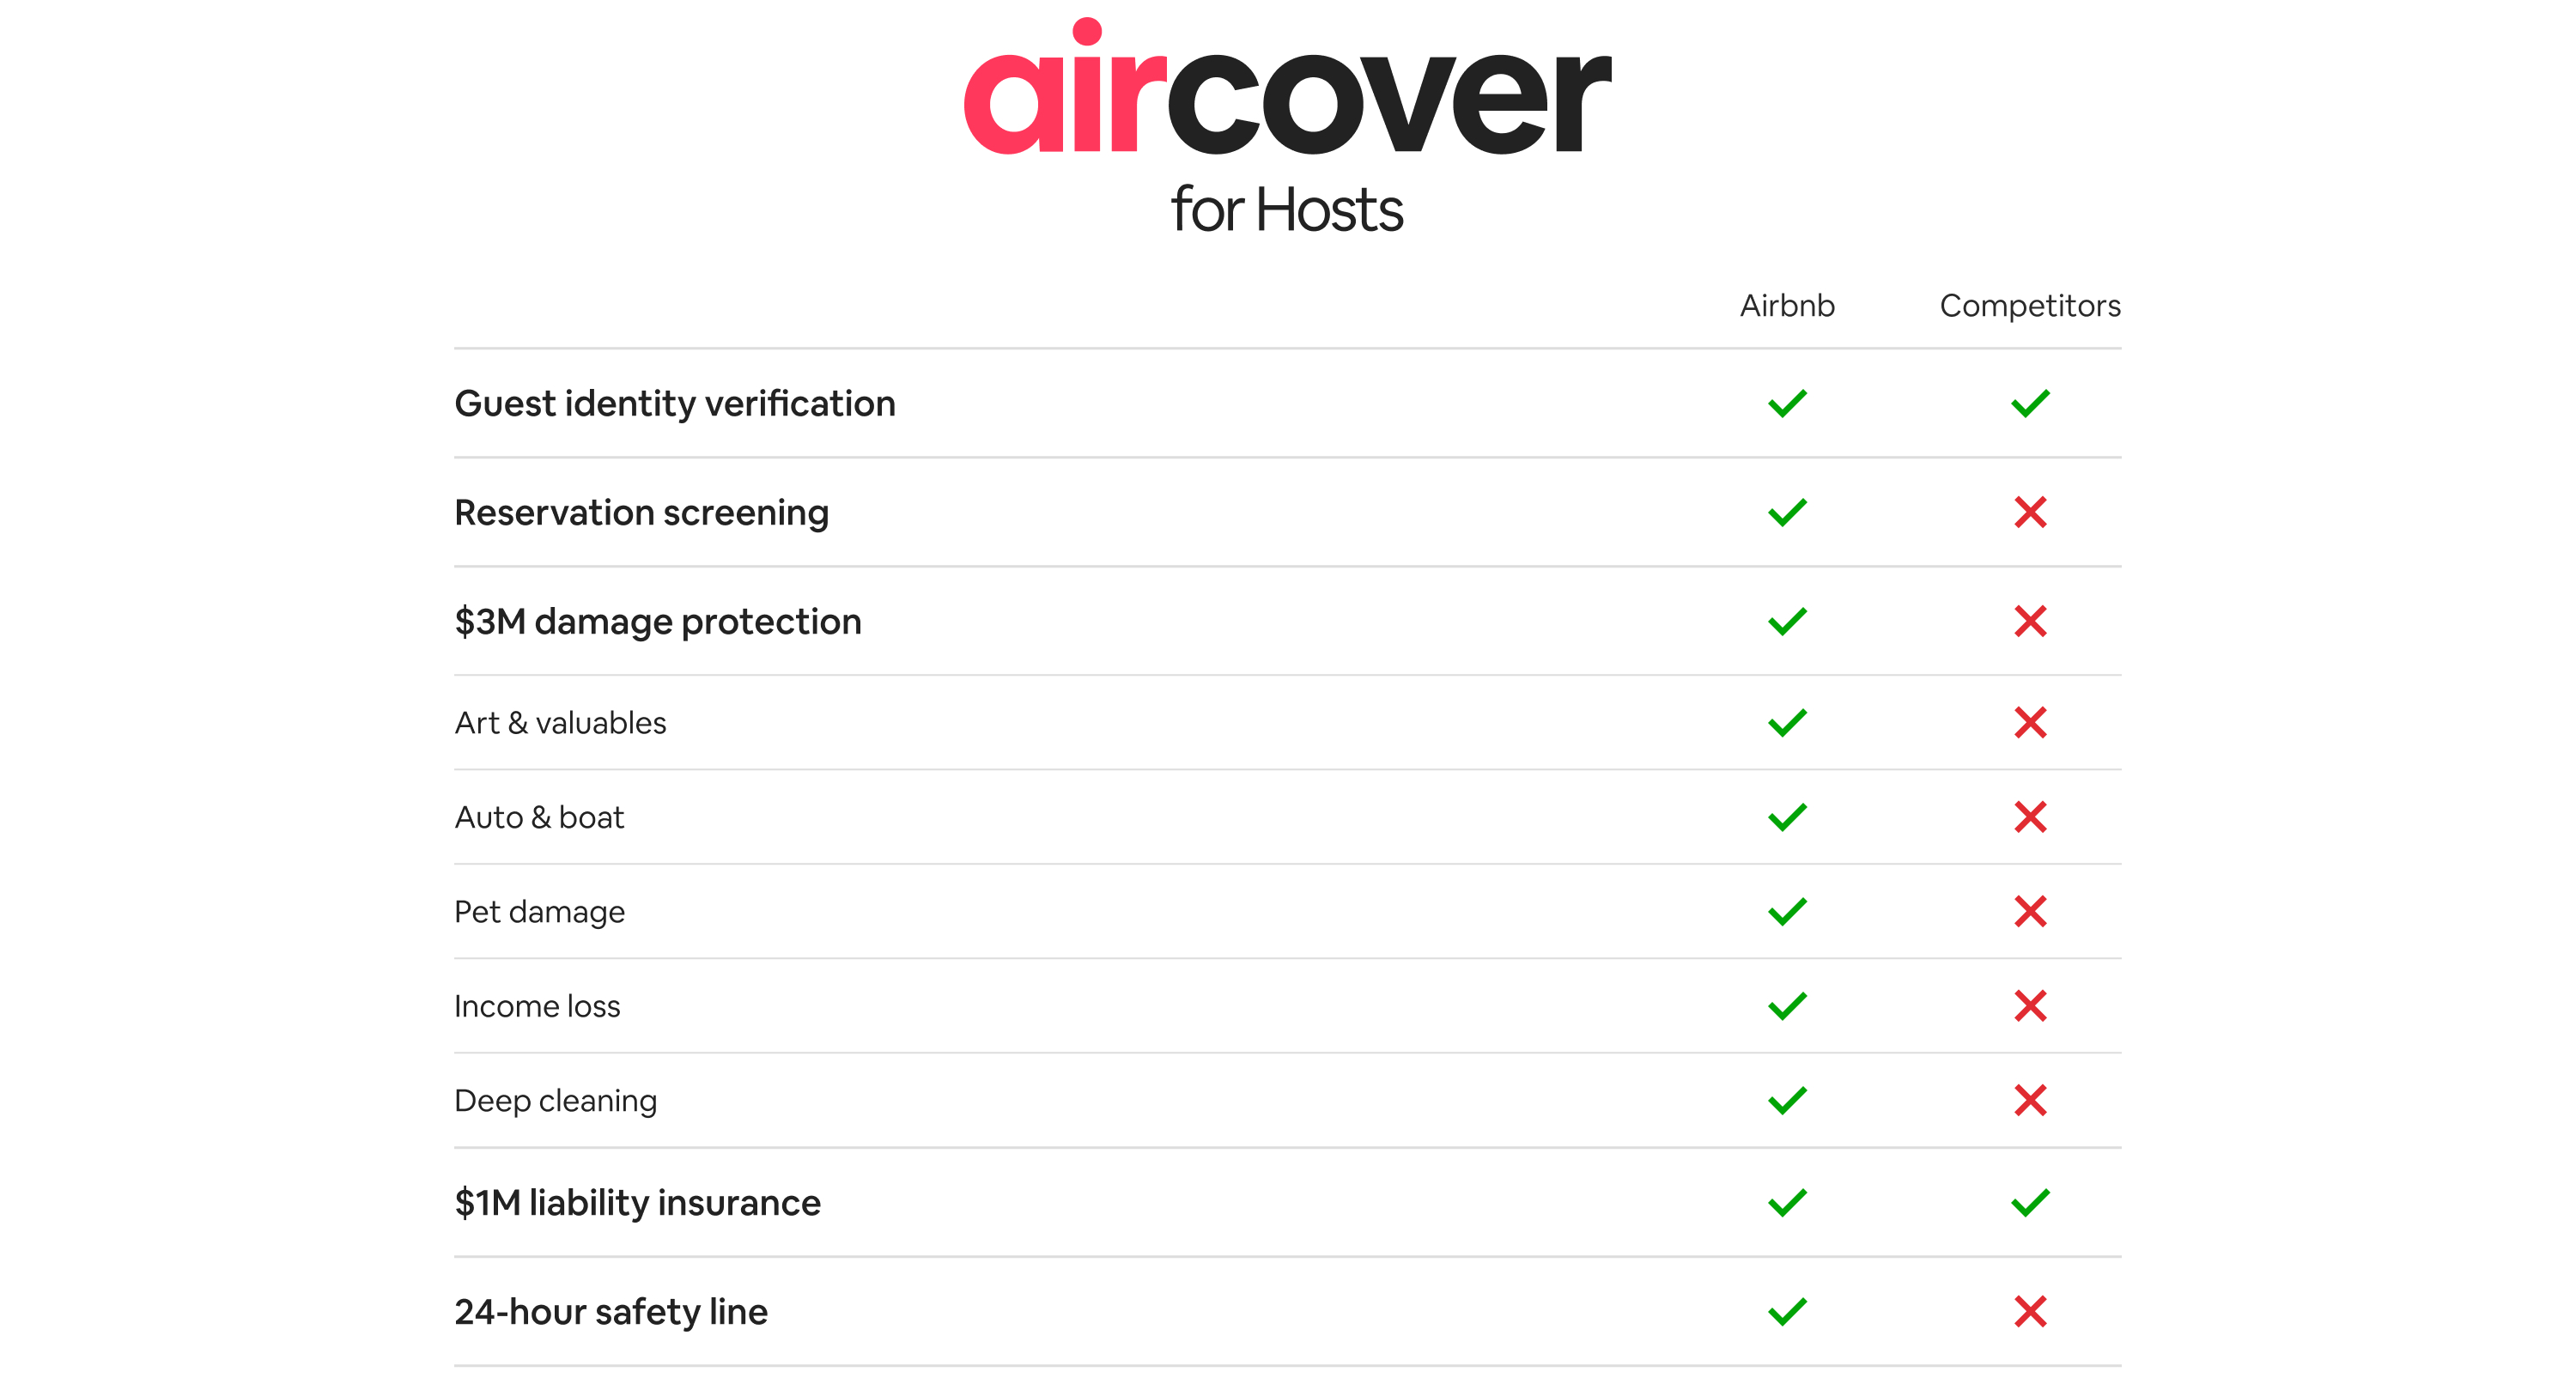 Comparison chart of features between Airbnb and competitors